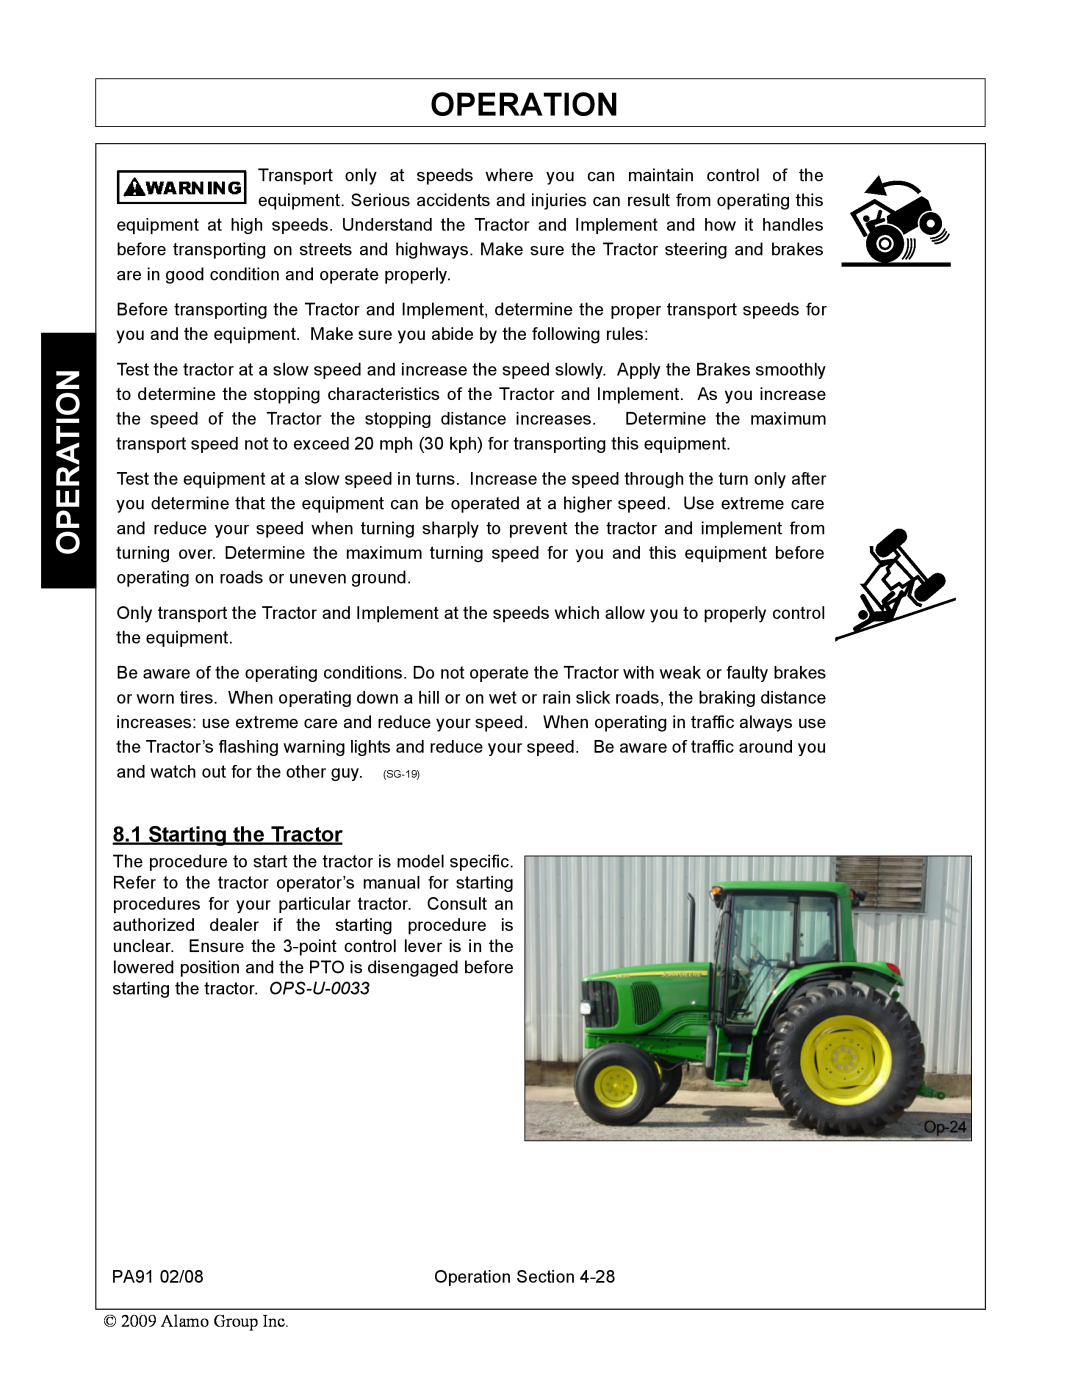 Alamo 7191852C manual Starting the Tractor, Operation 